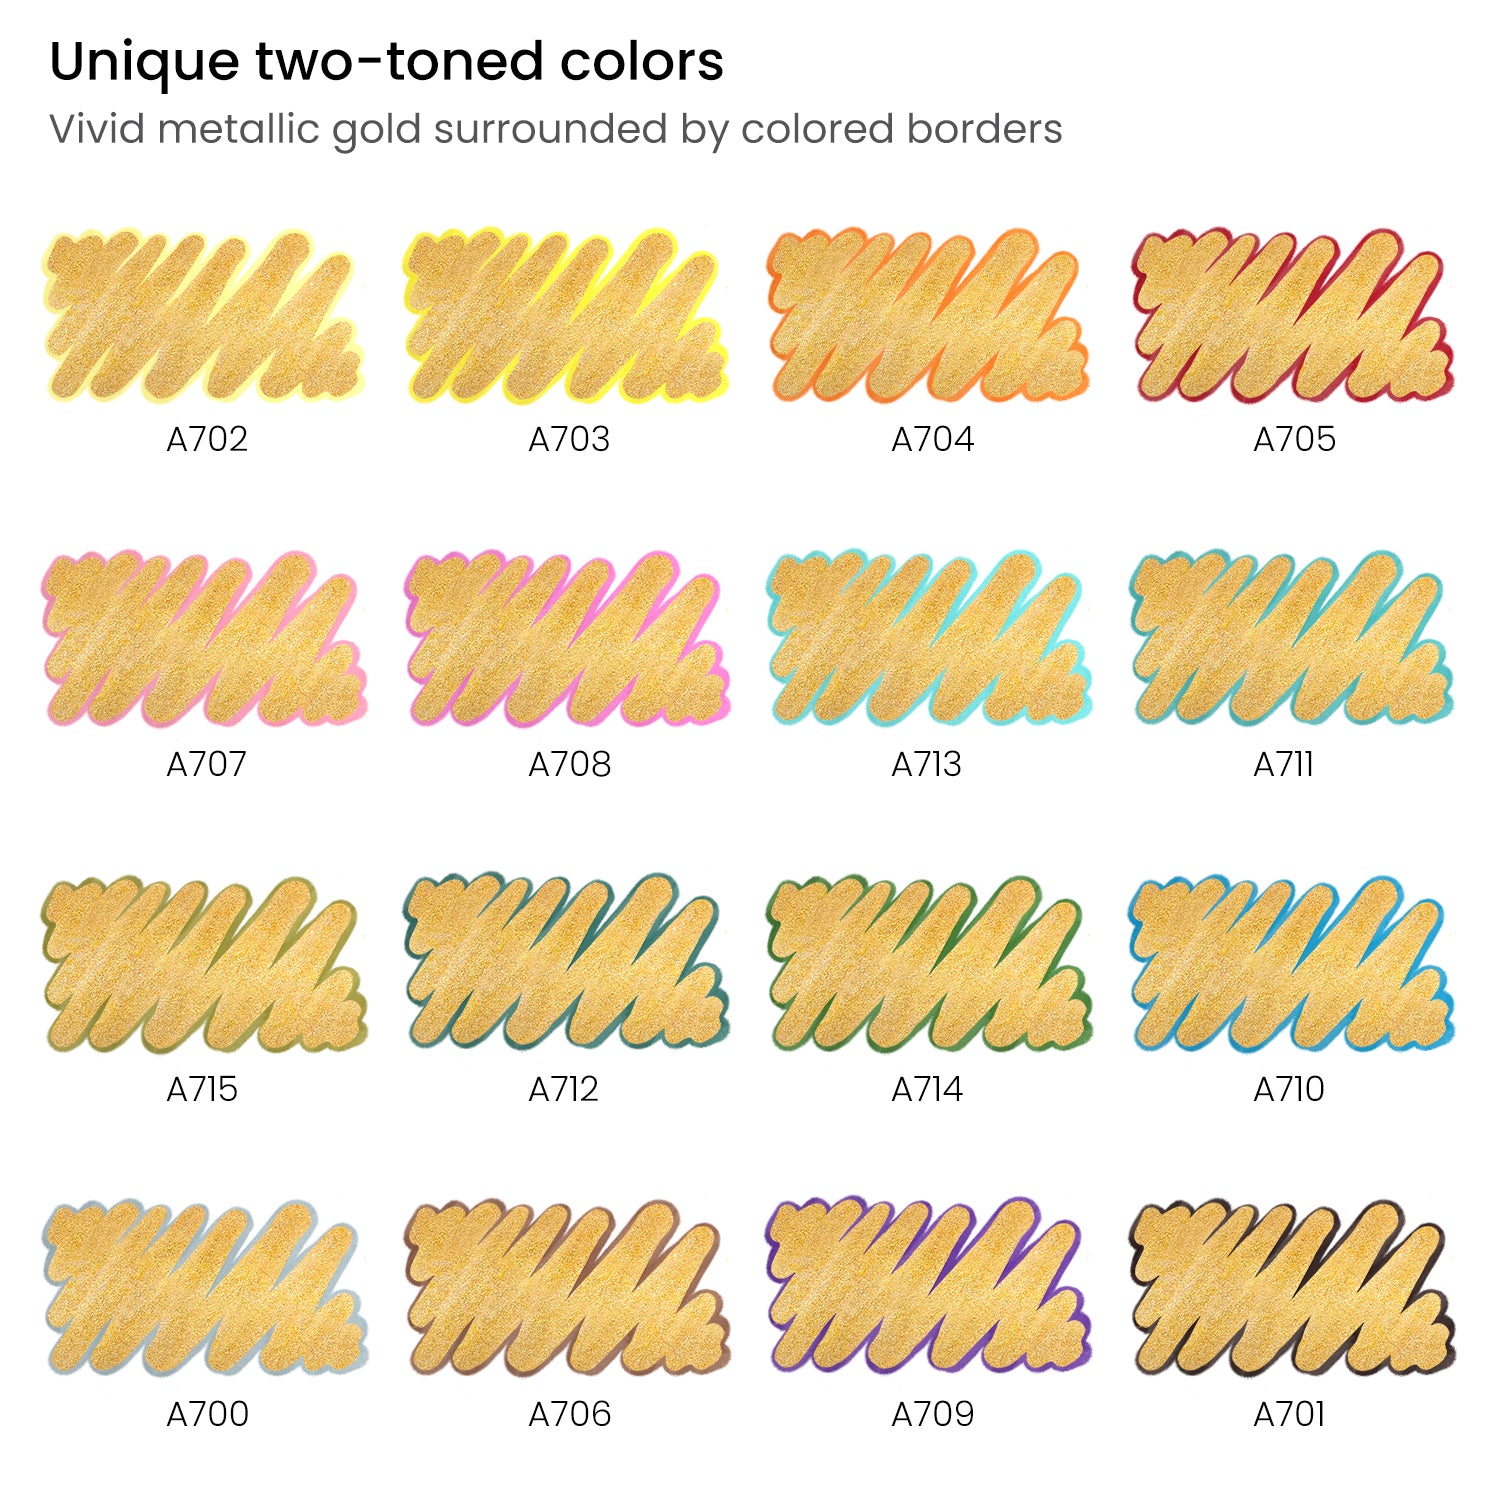 ZSCM 8 Colors Gold Metallic Outline Markers – Zscm The world of